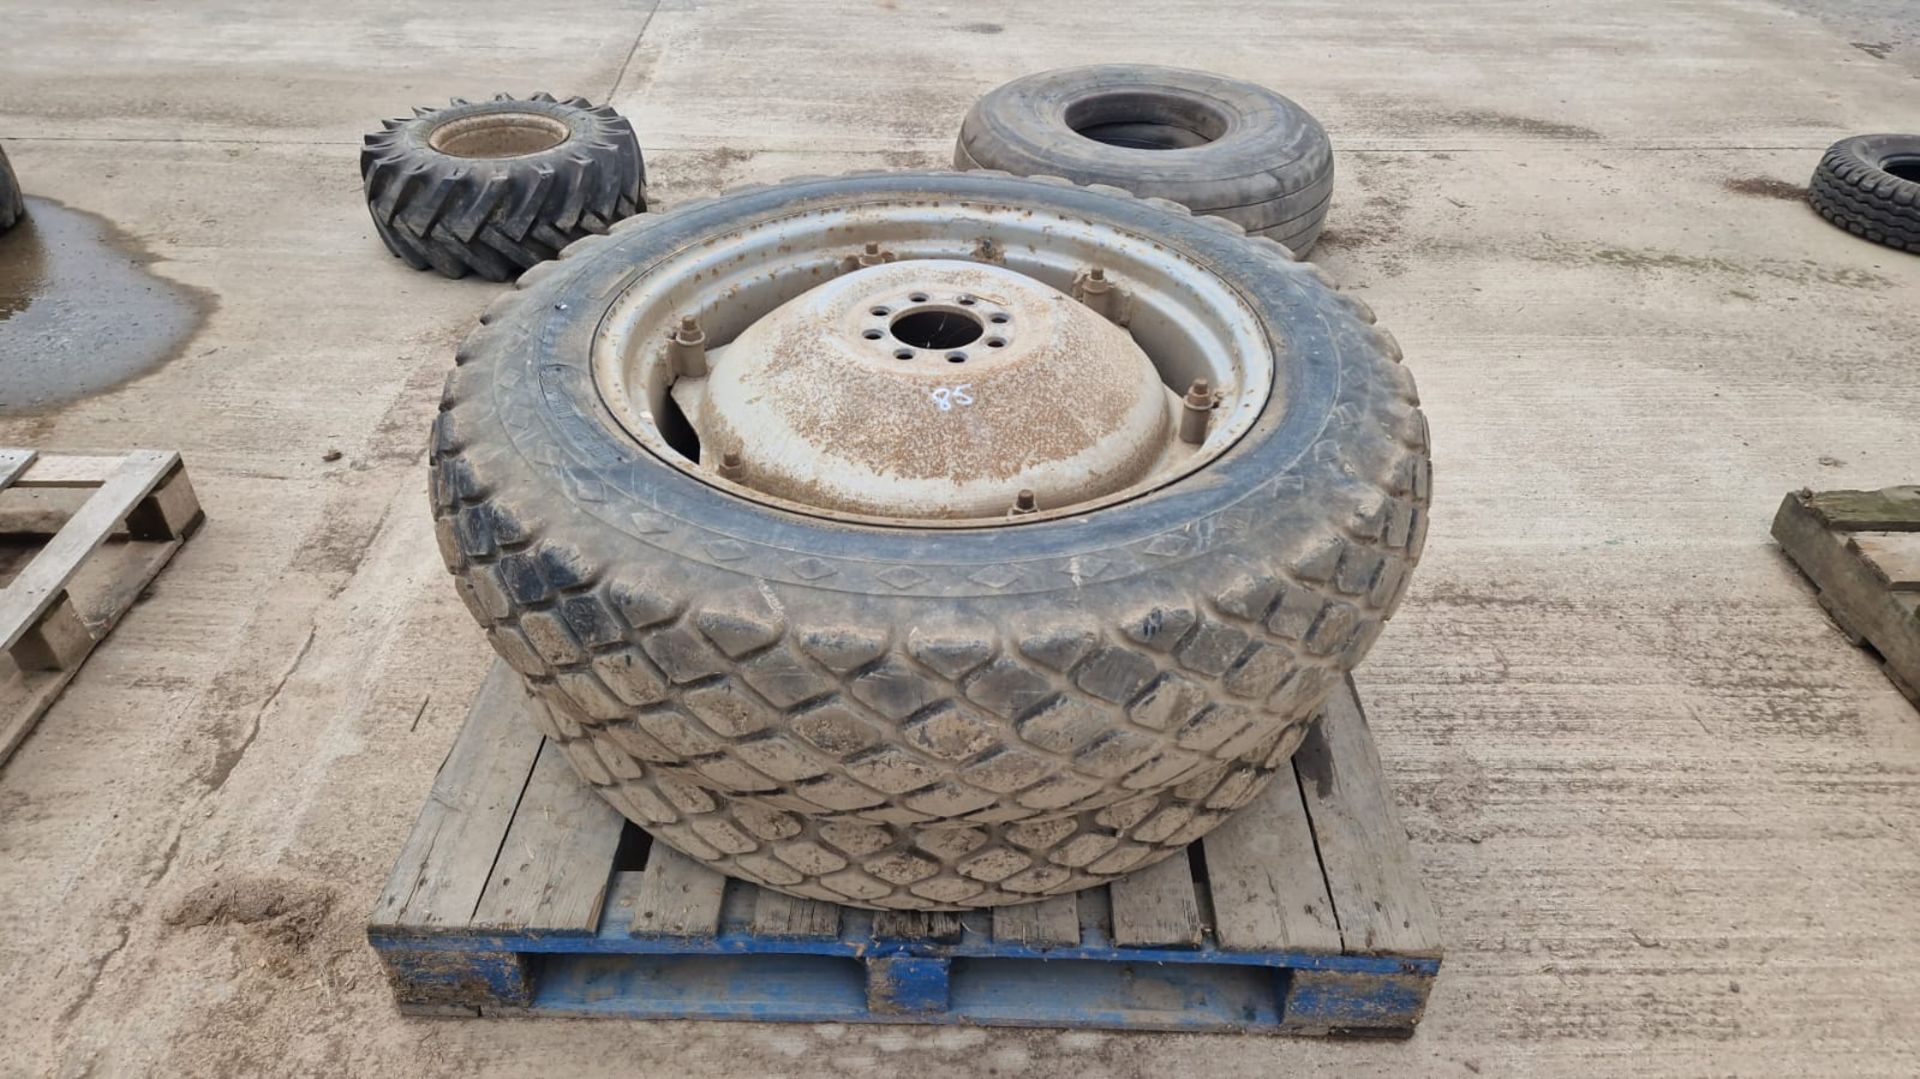 Pair of 11.2/10-28 grass tyres with Massey Ferguson wheel pans